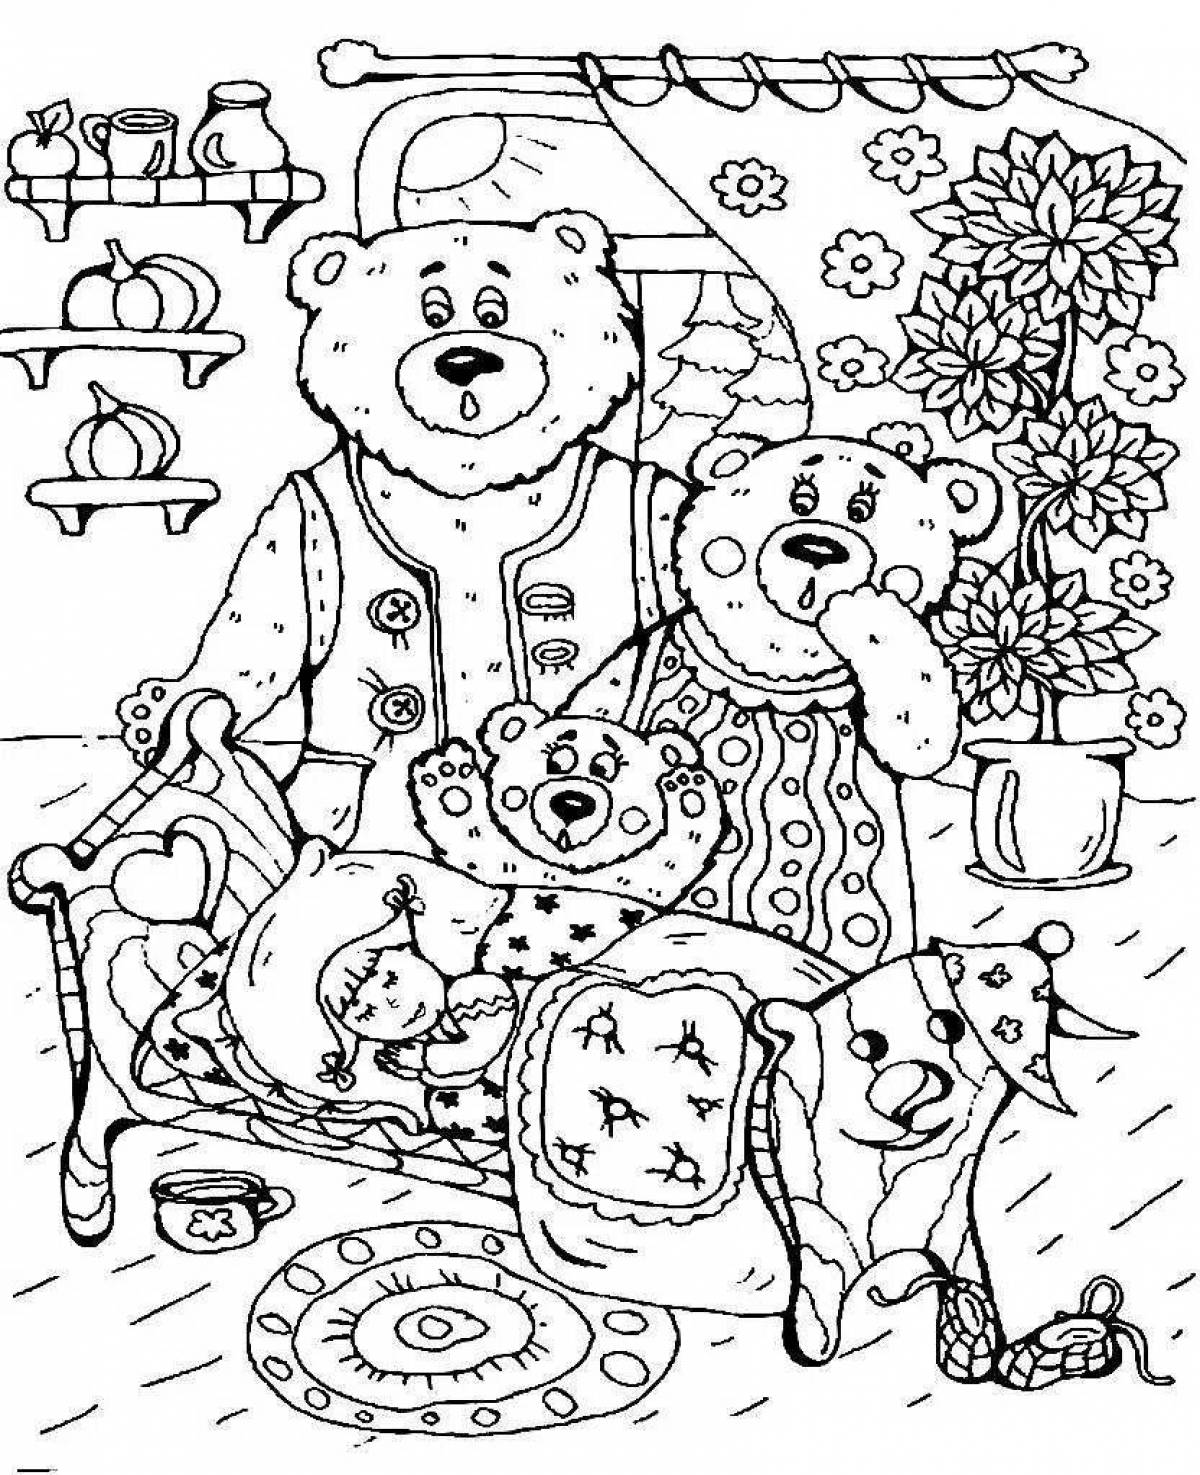 Three bears coloring page for pre-k